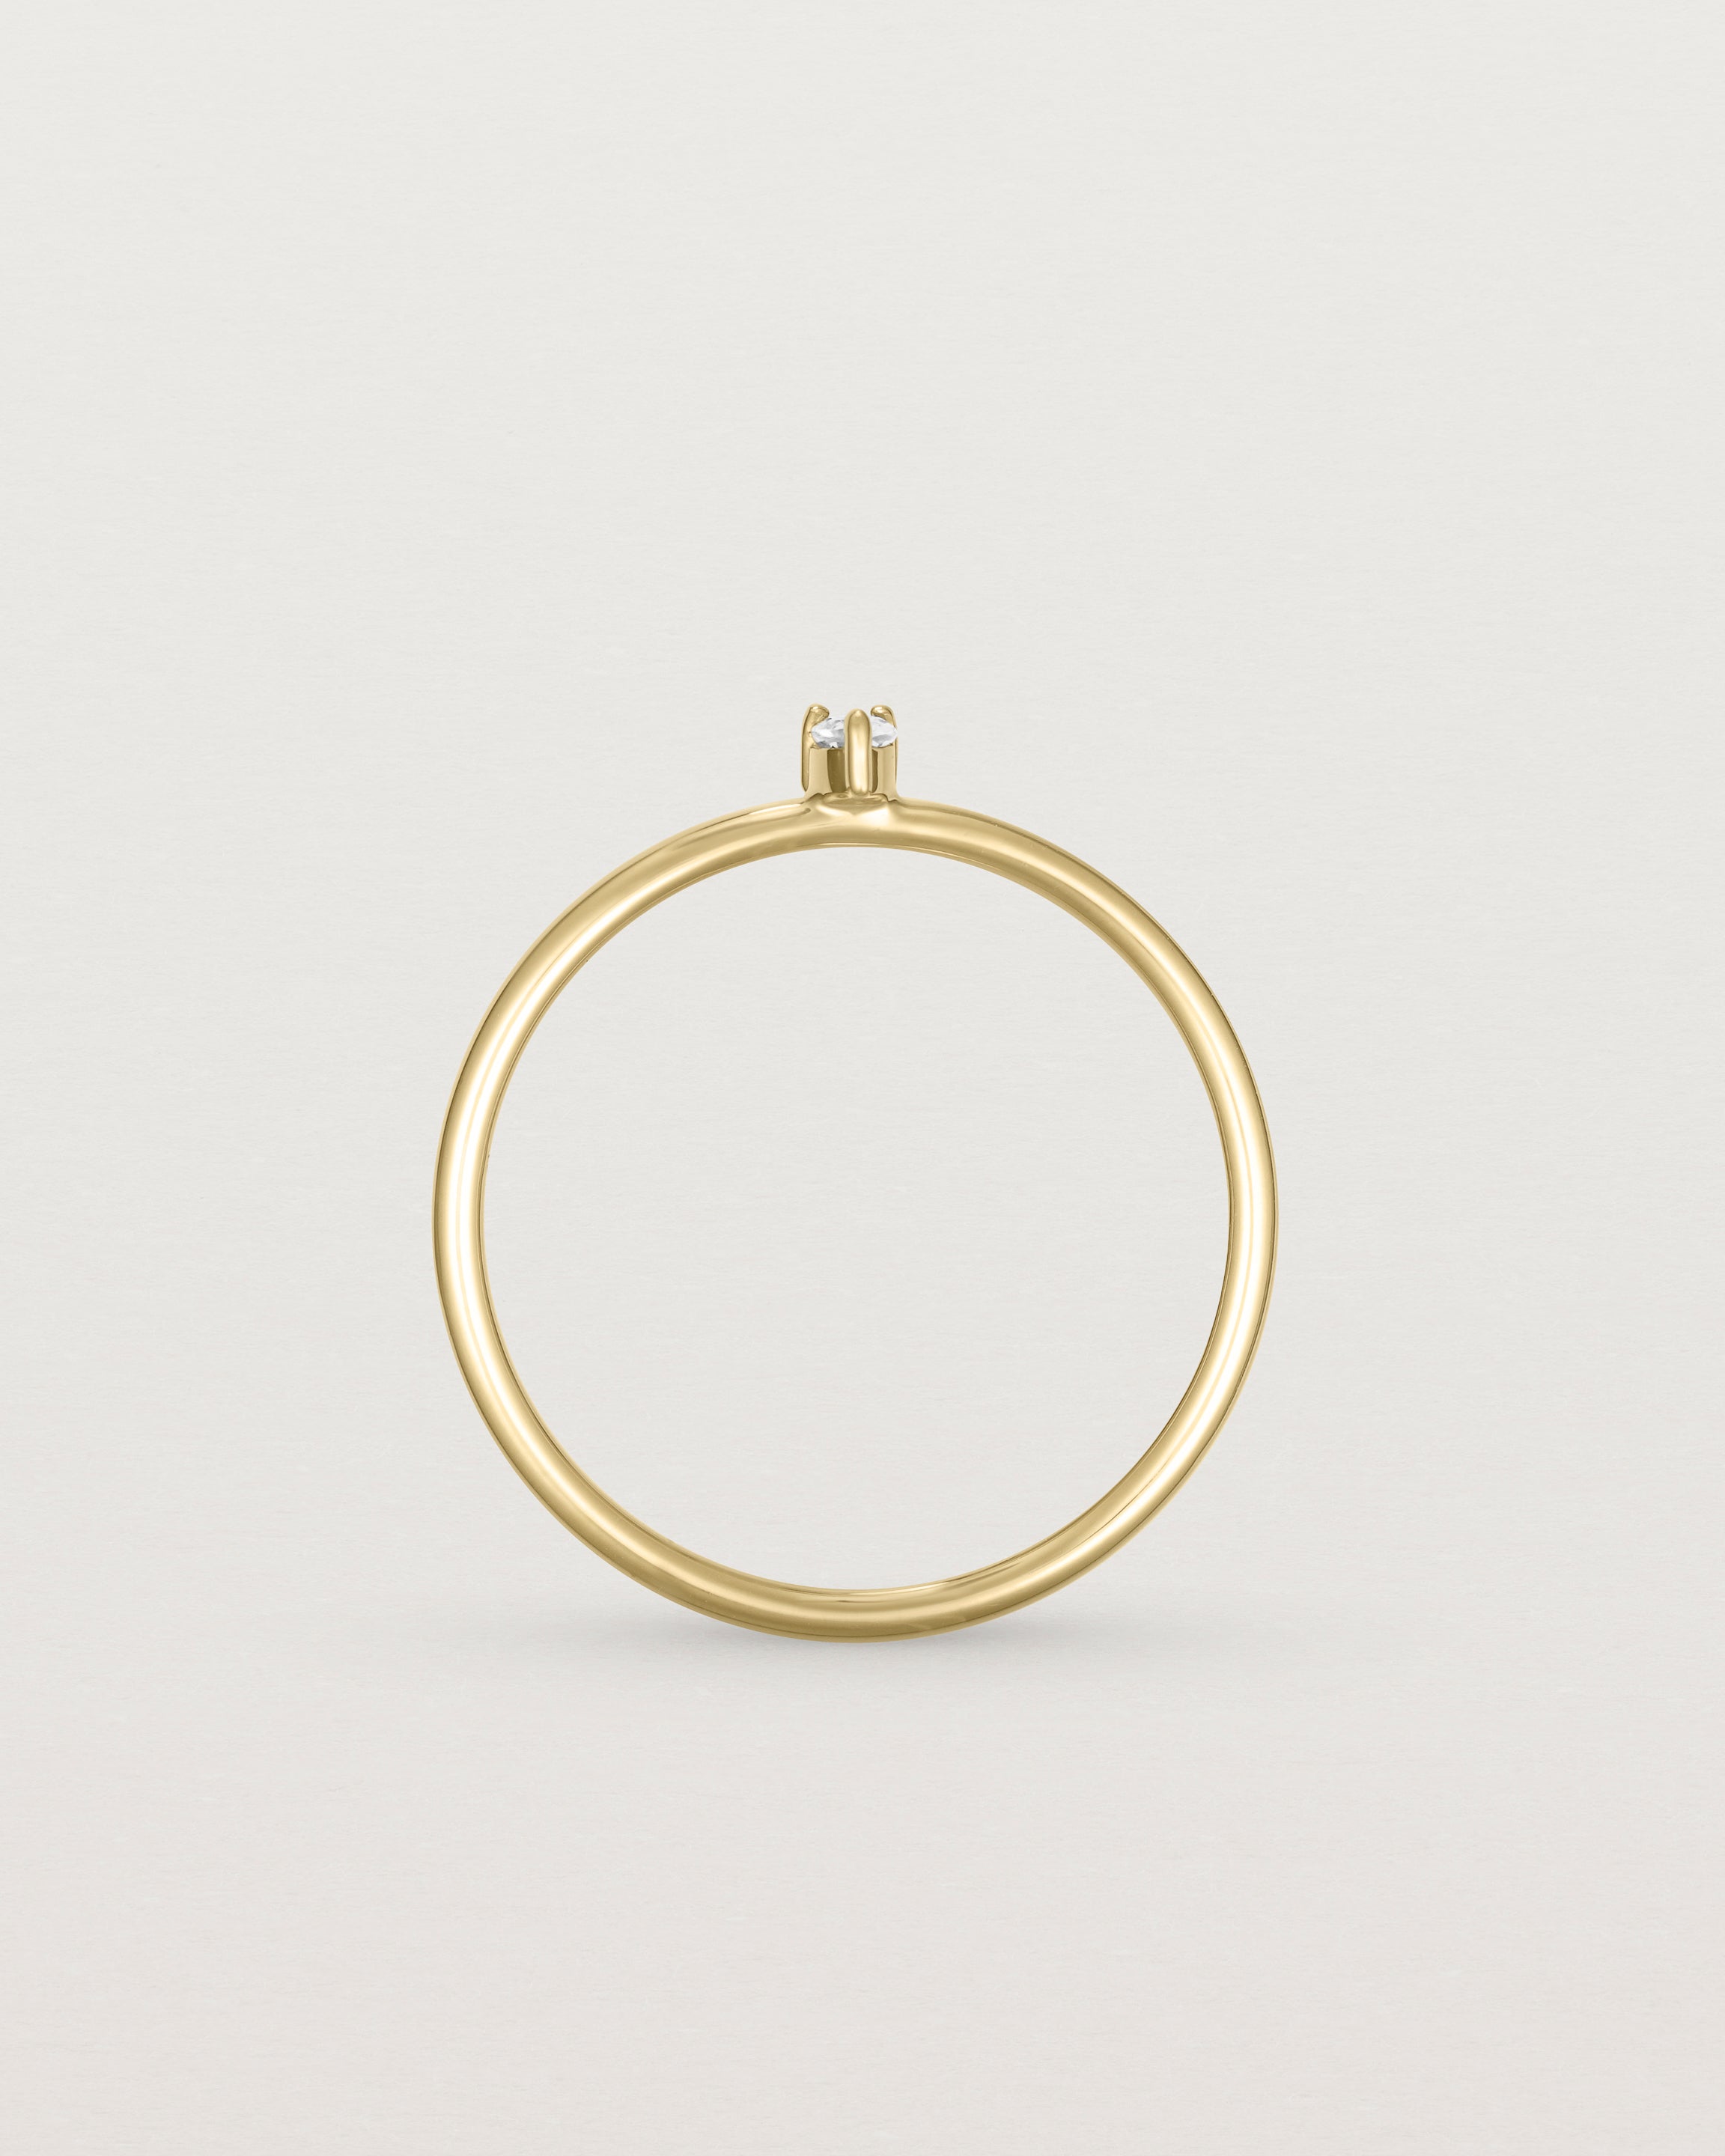 Standing view of the Danaë Stacking Ring | Diamond in yellow gold.